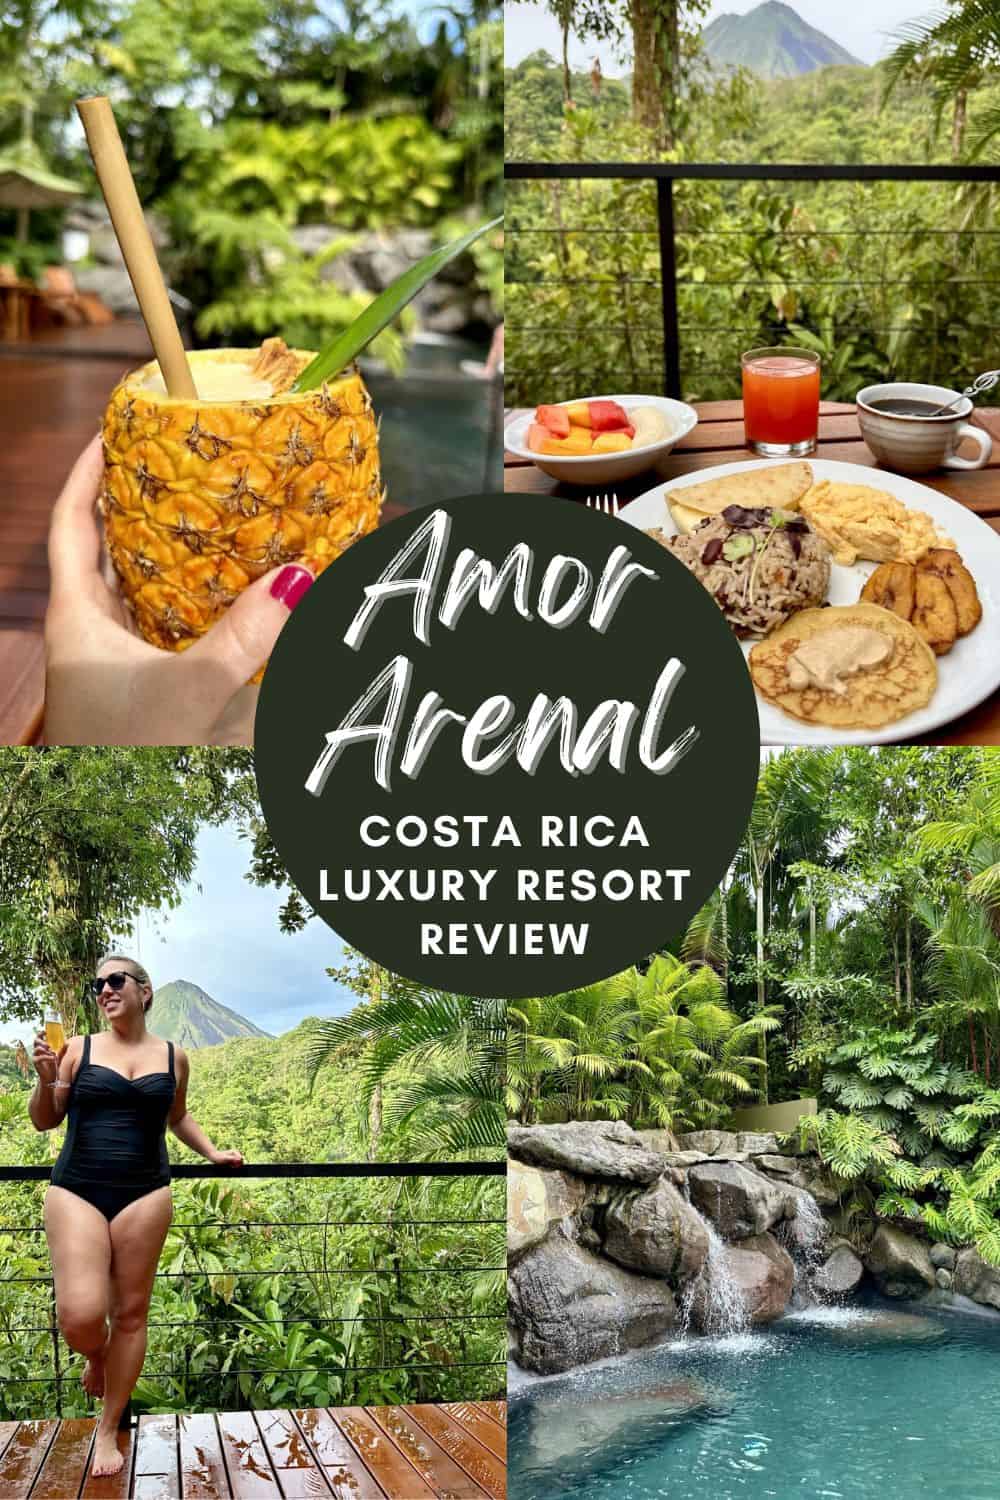 A Detailed, Honest Review of Amor Arenal (Costa Rica Luxury Resort) | The boutique luxury Amor Arenal resort is tucked into the rainforest of La Fortuna, Costa Rica, with great views of the Arenal Volcano. Here's my detailed review of this beautiful small intimate resort, including the balconies, rooms, service, pools, food, and more! Where to stay in Arenal or La Fortuna, best Costa Rica hotels, rainforest hotels. #luxuryhotel #luxuryresort #costarica #arenal #lafortuna